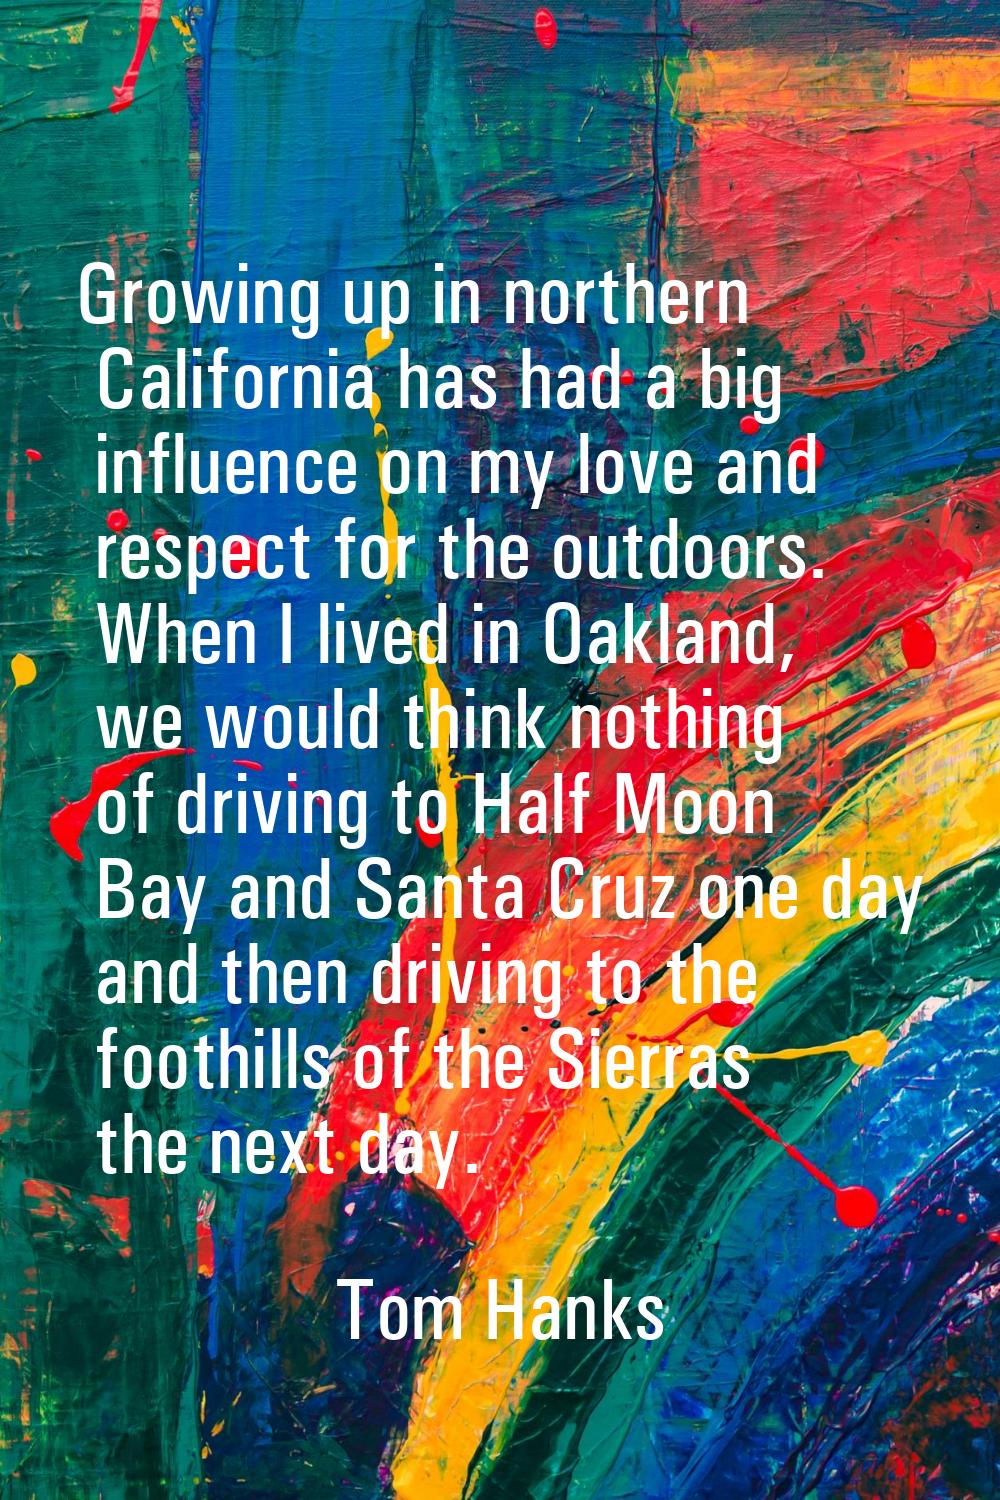 Growing up in northern California has had a big influence on my love and respect for the outdoors. 